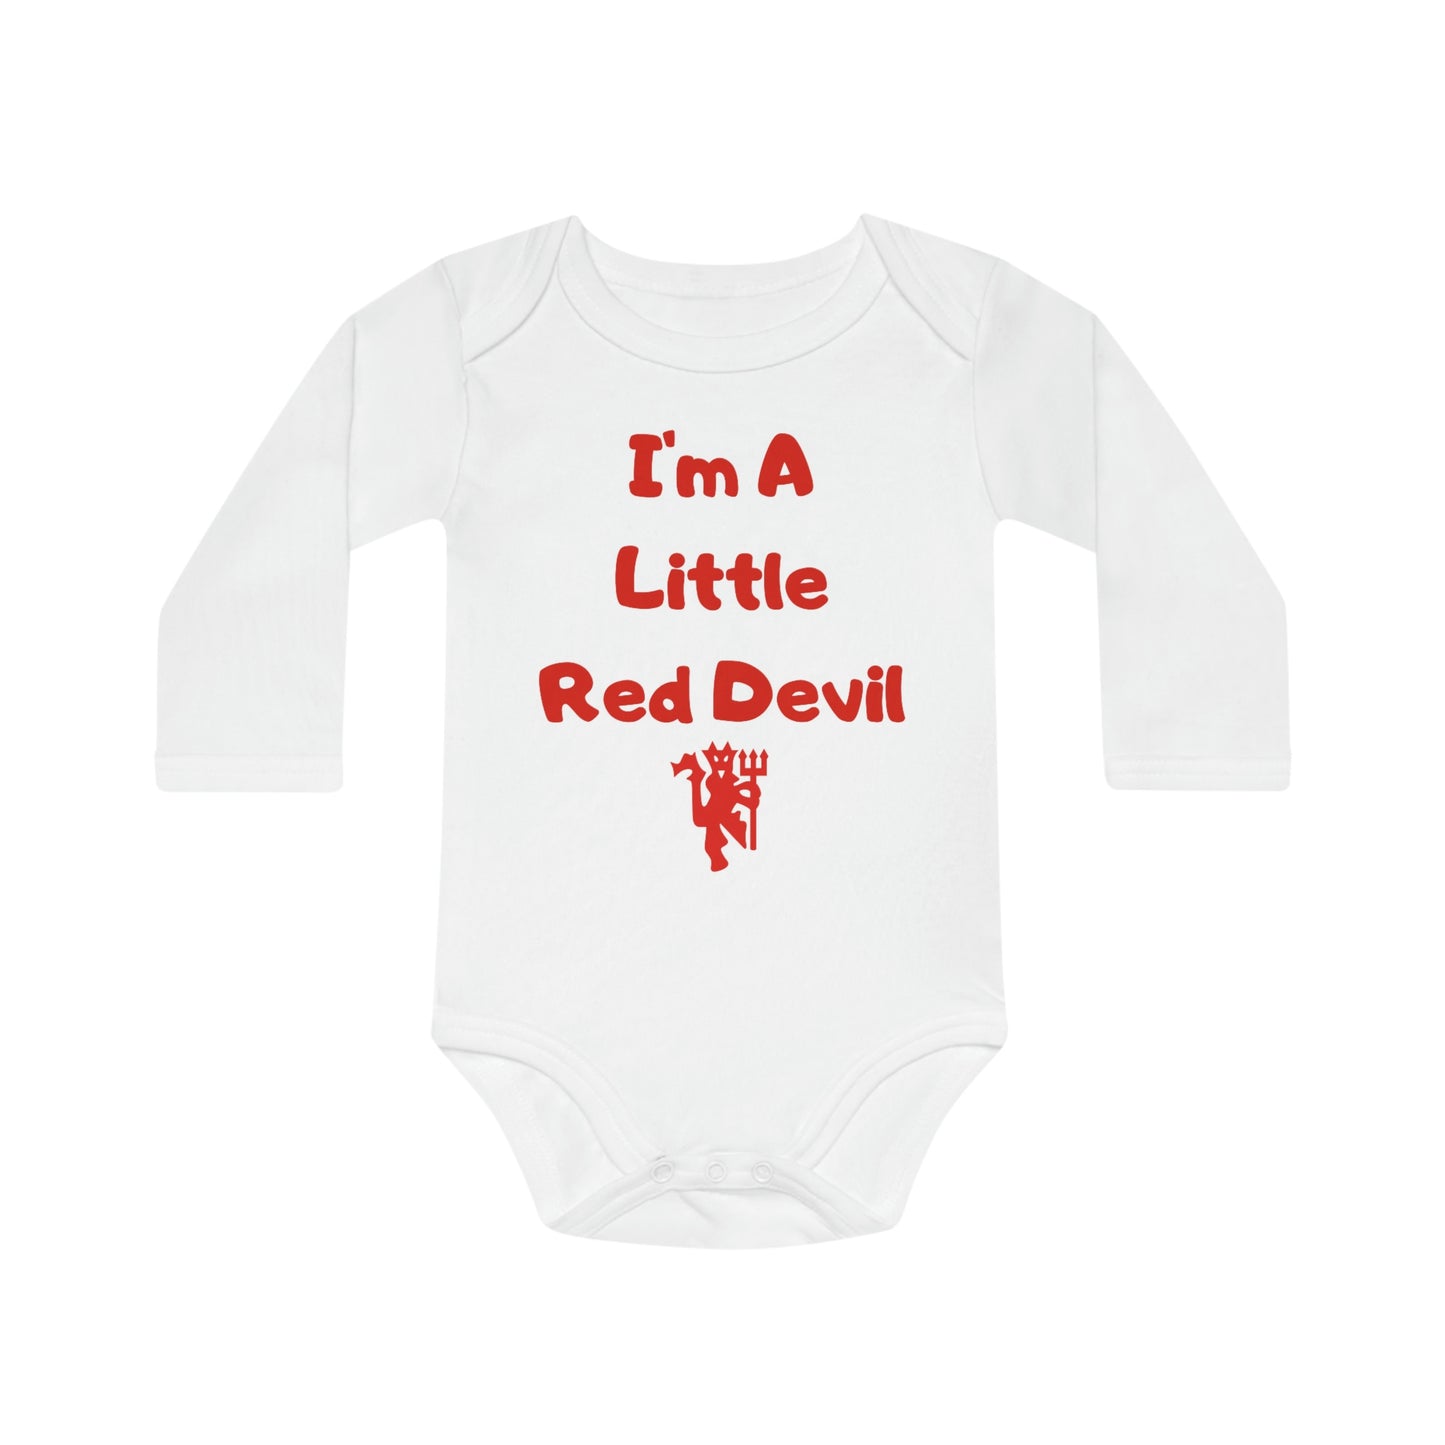 I'm A Little Red Devil - Manchester United Supporter Body